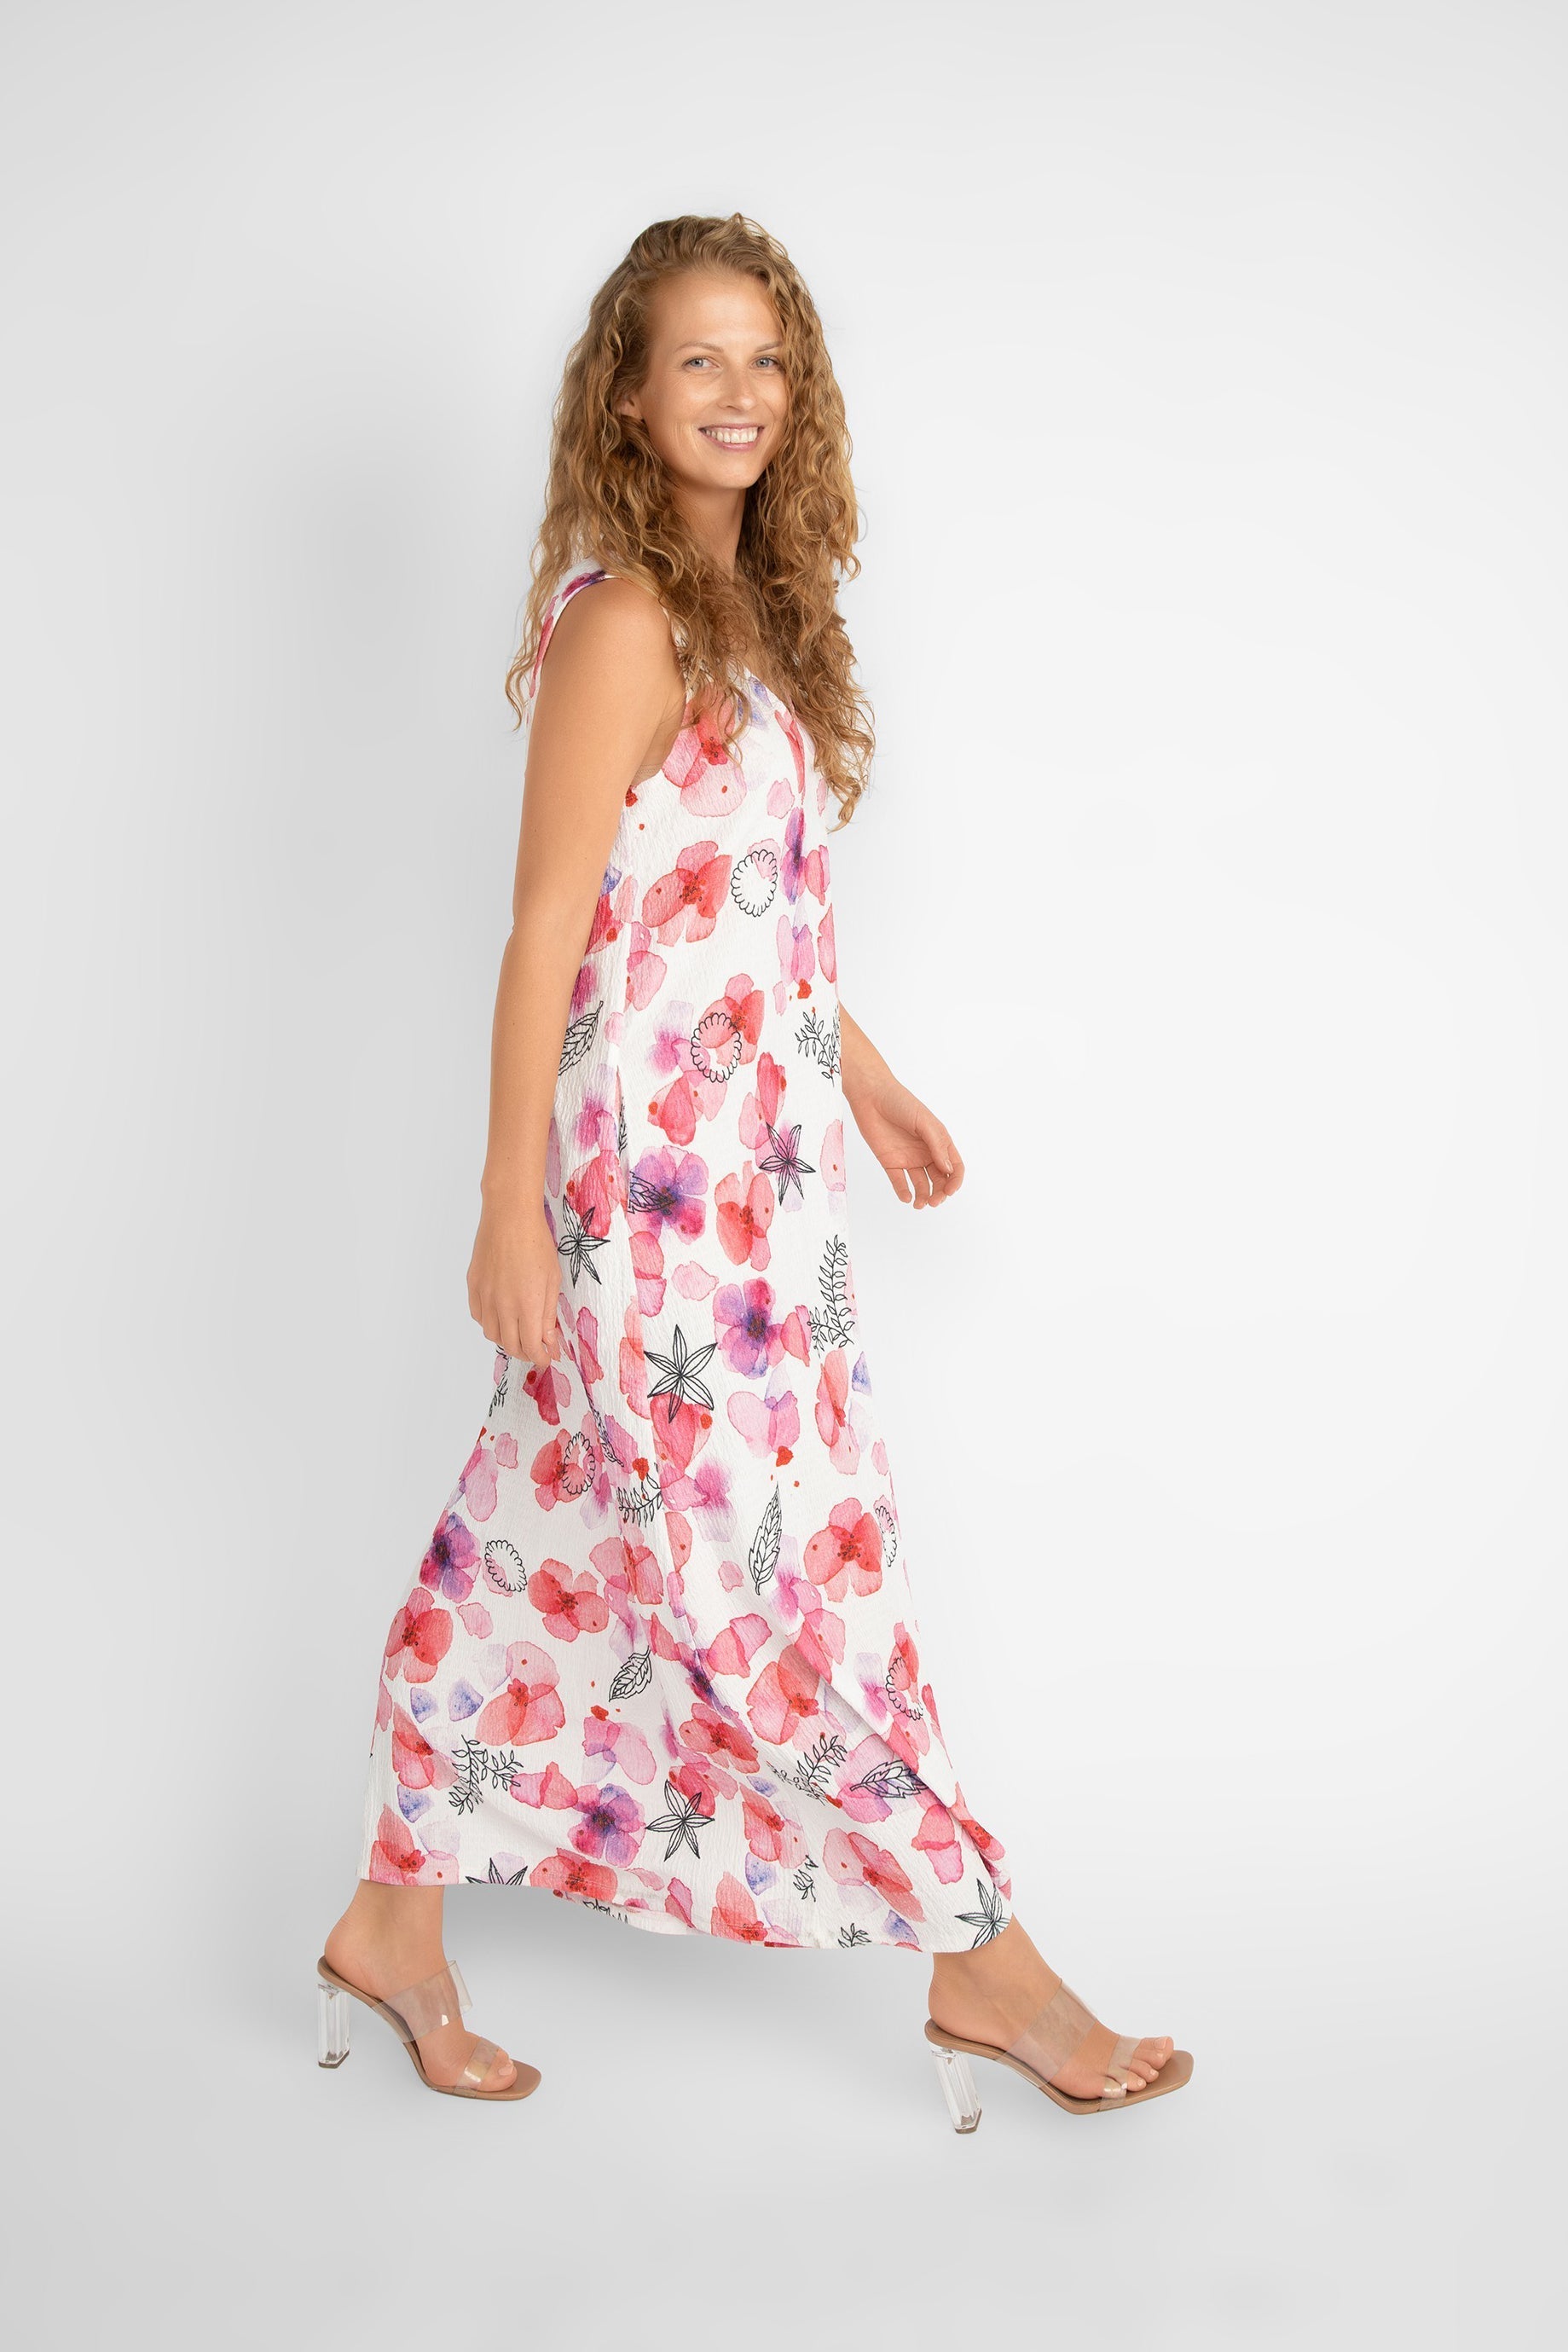 Side view of Compli K (33565) Women's Sleeveless V-neck Printed Maxi Dress in a White with Pink Florals and Black Illustrations